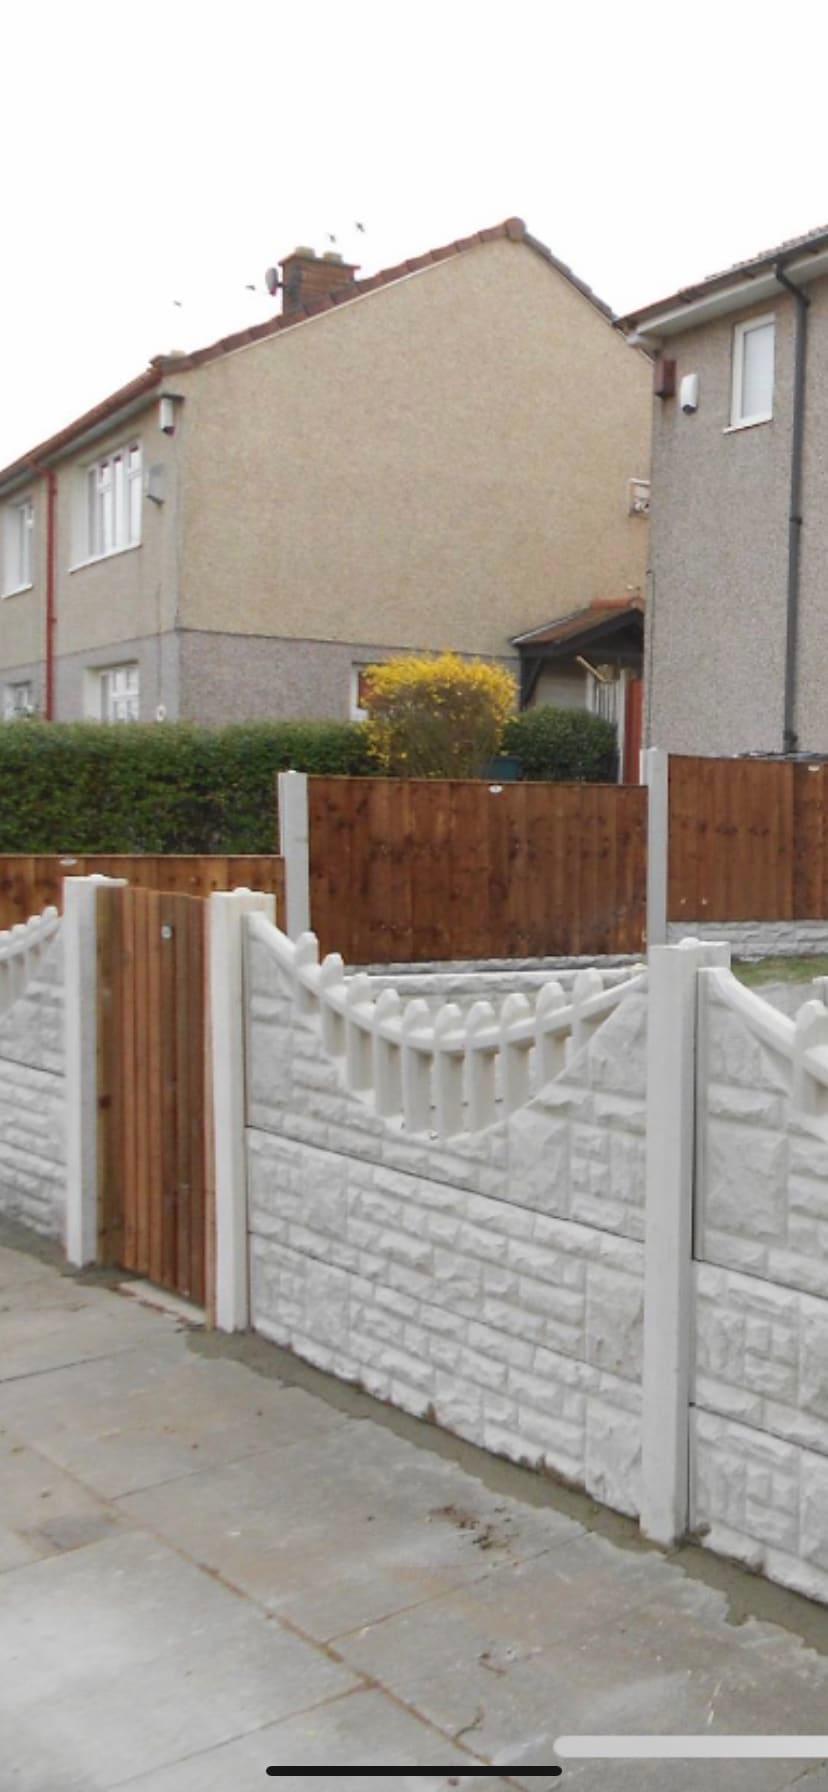 Images North West Fencing Products Ltd